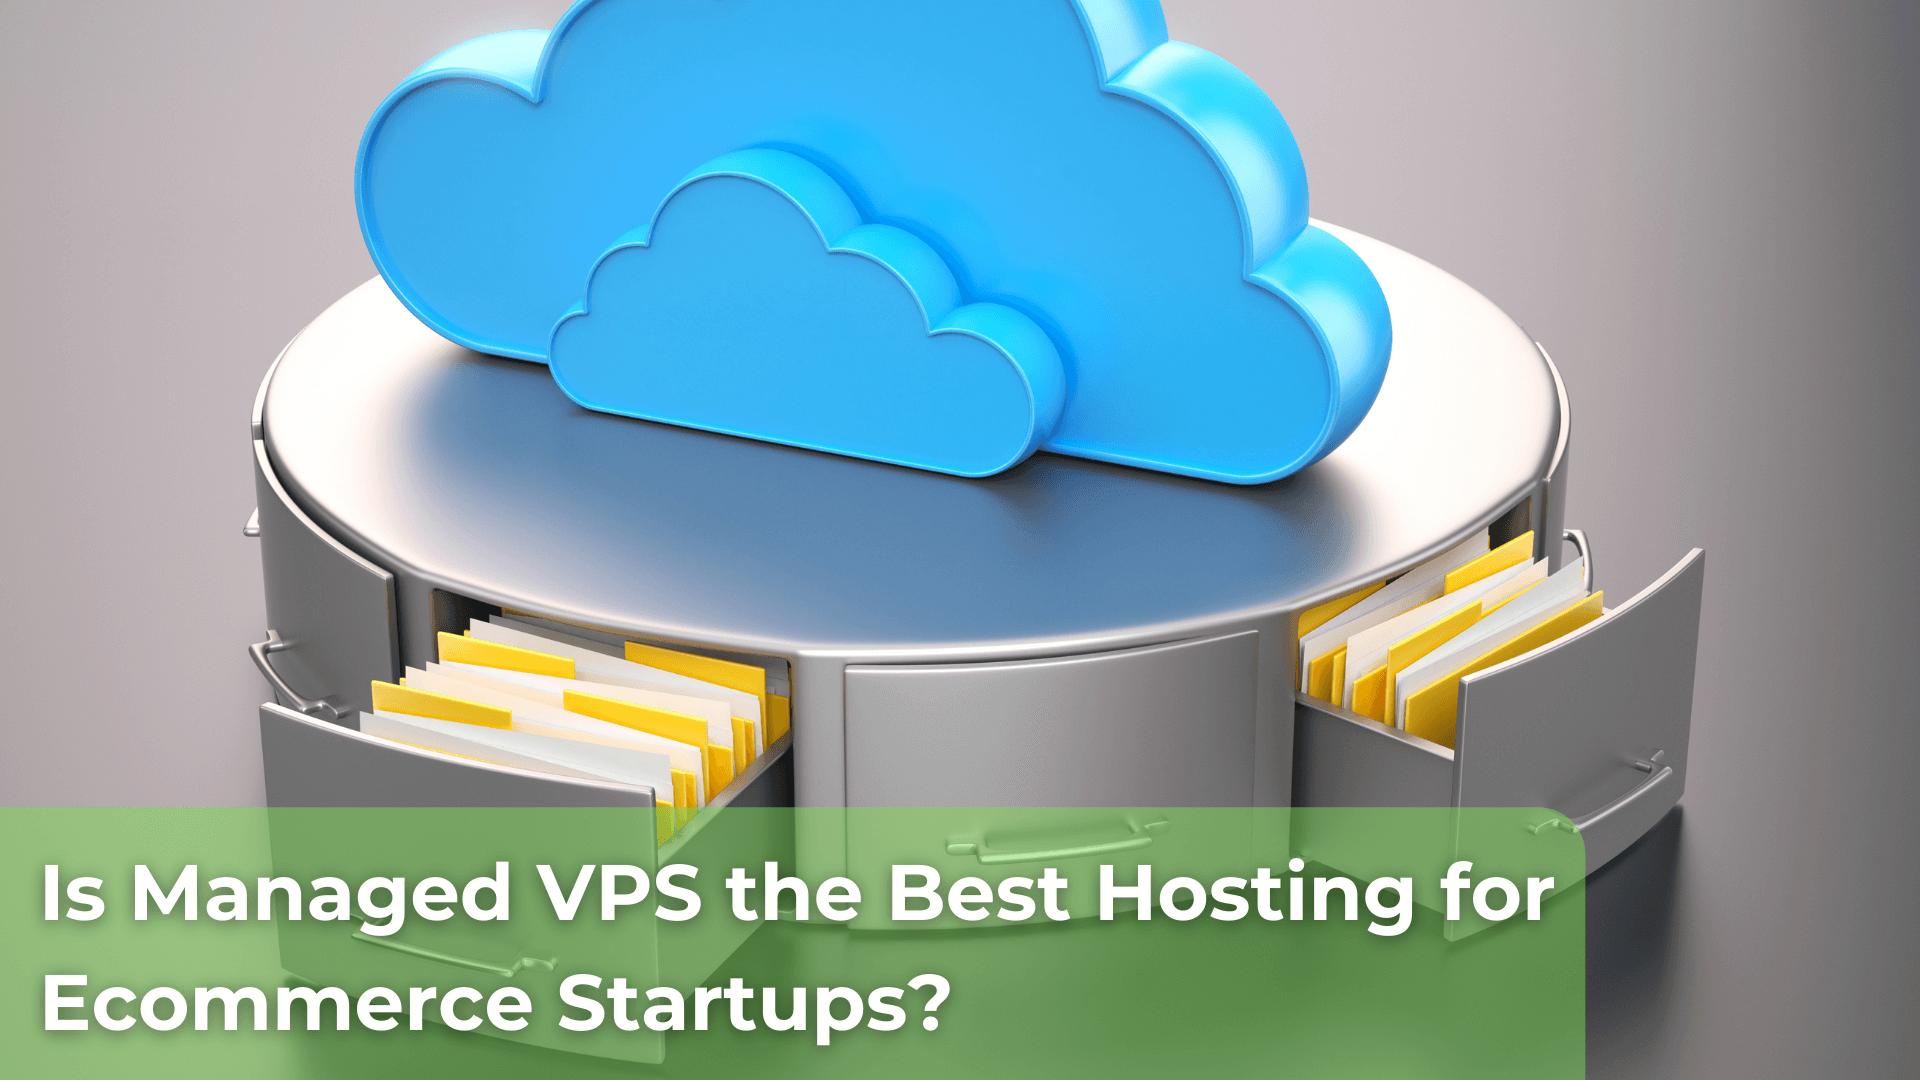 Is Managed VPS the Best Hosting for Ecommerce Startups?